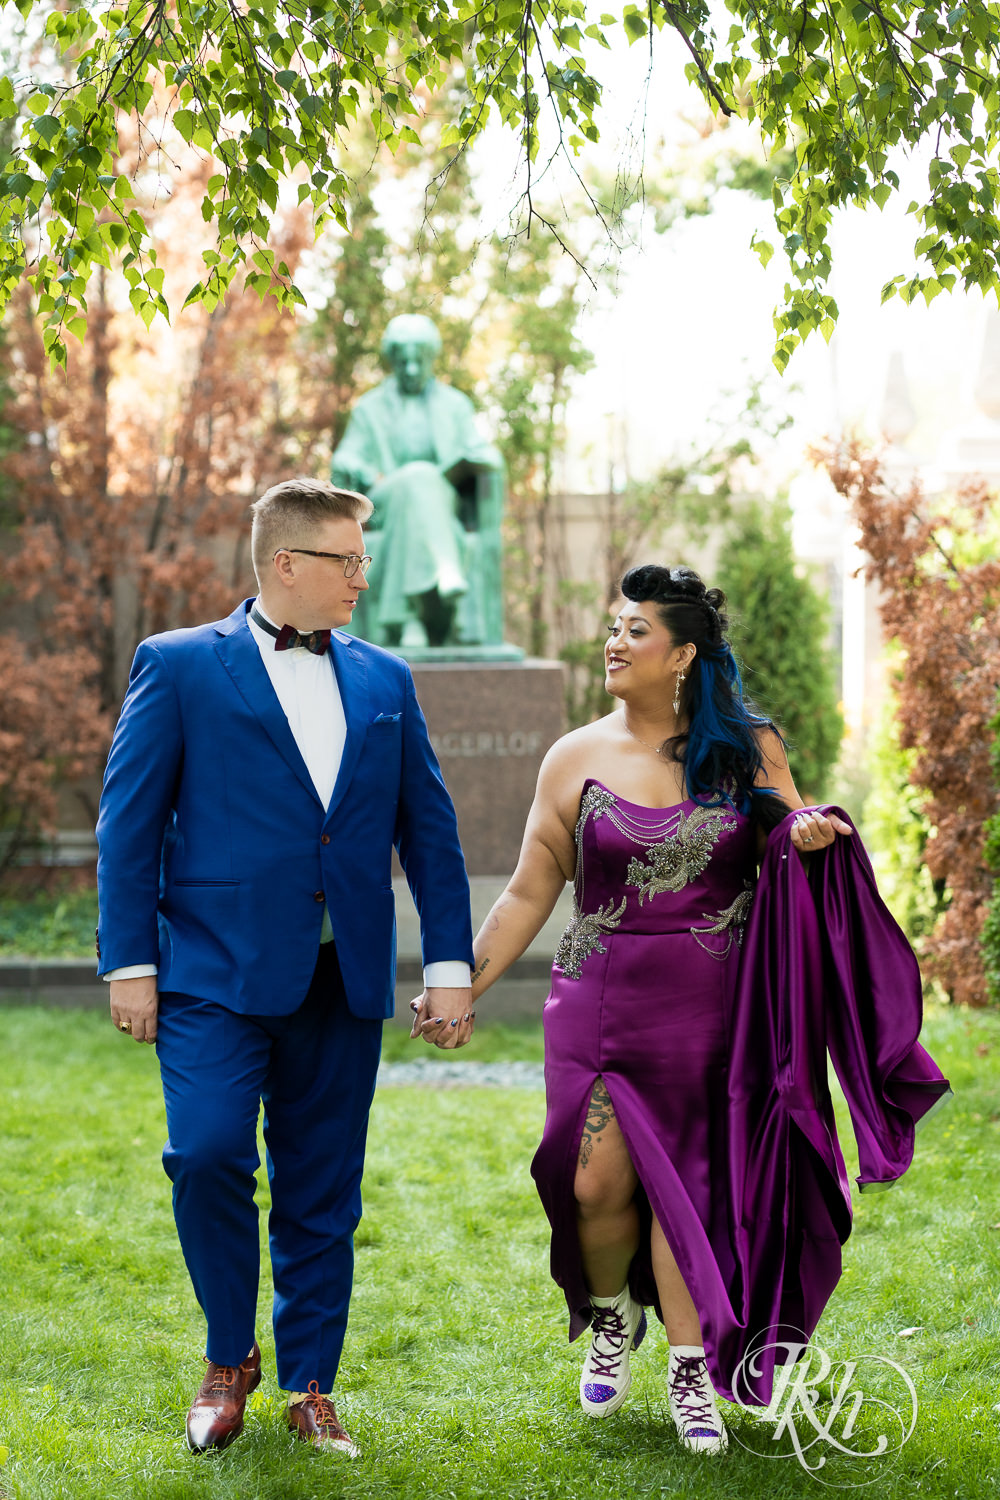 Filipino bride with mohawk dressed in purple wedding dress and groom smile at American Swedish Institute in Minnesota.